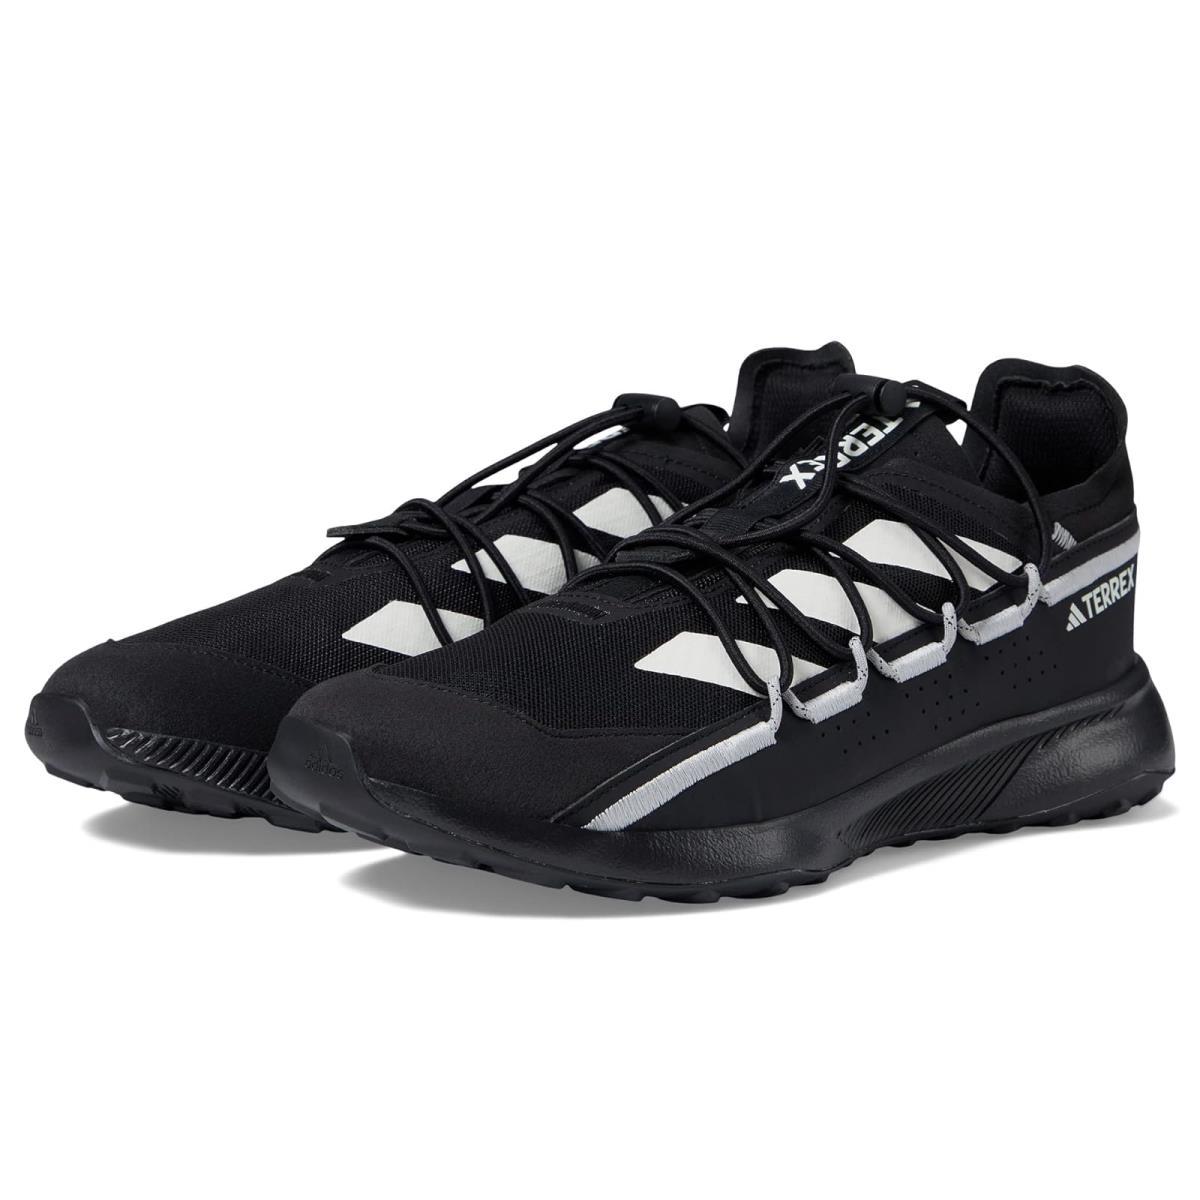 Man`s Sneakers Athletic Shoes Adidas Outdoor Terrex Voyager 21 Black/Chalk White/Grey